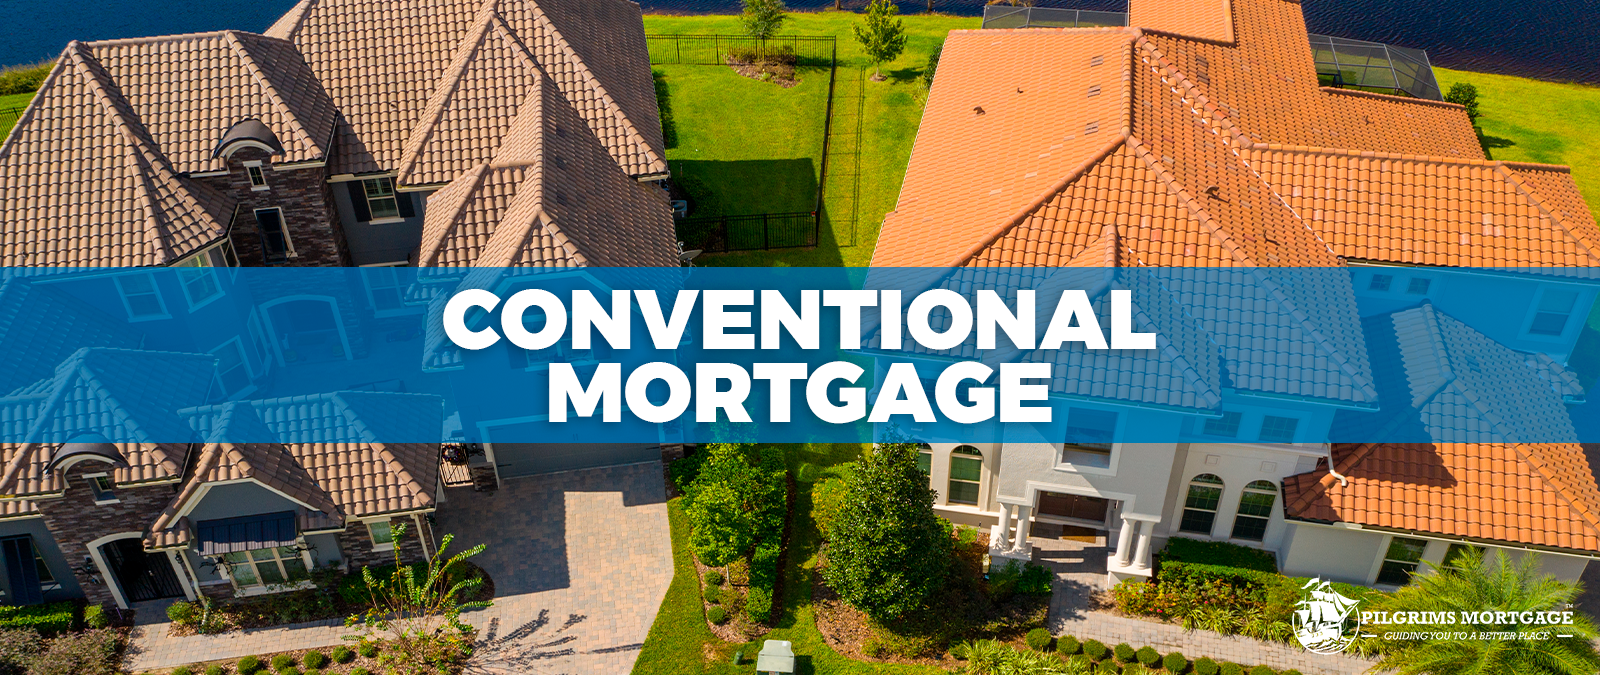 CONVENTIONAL MORTGAGE